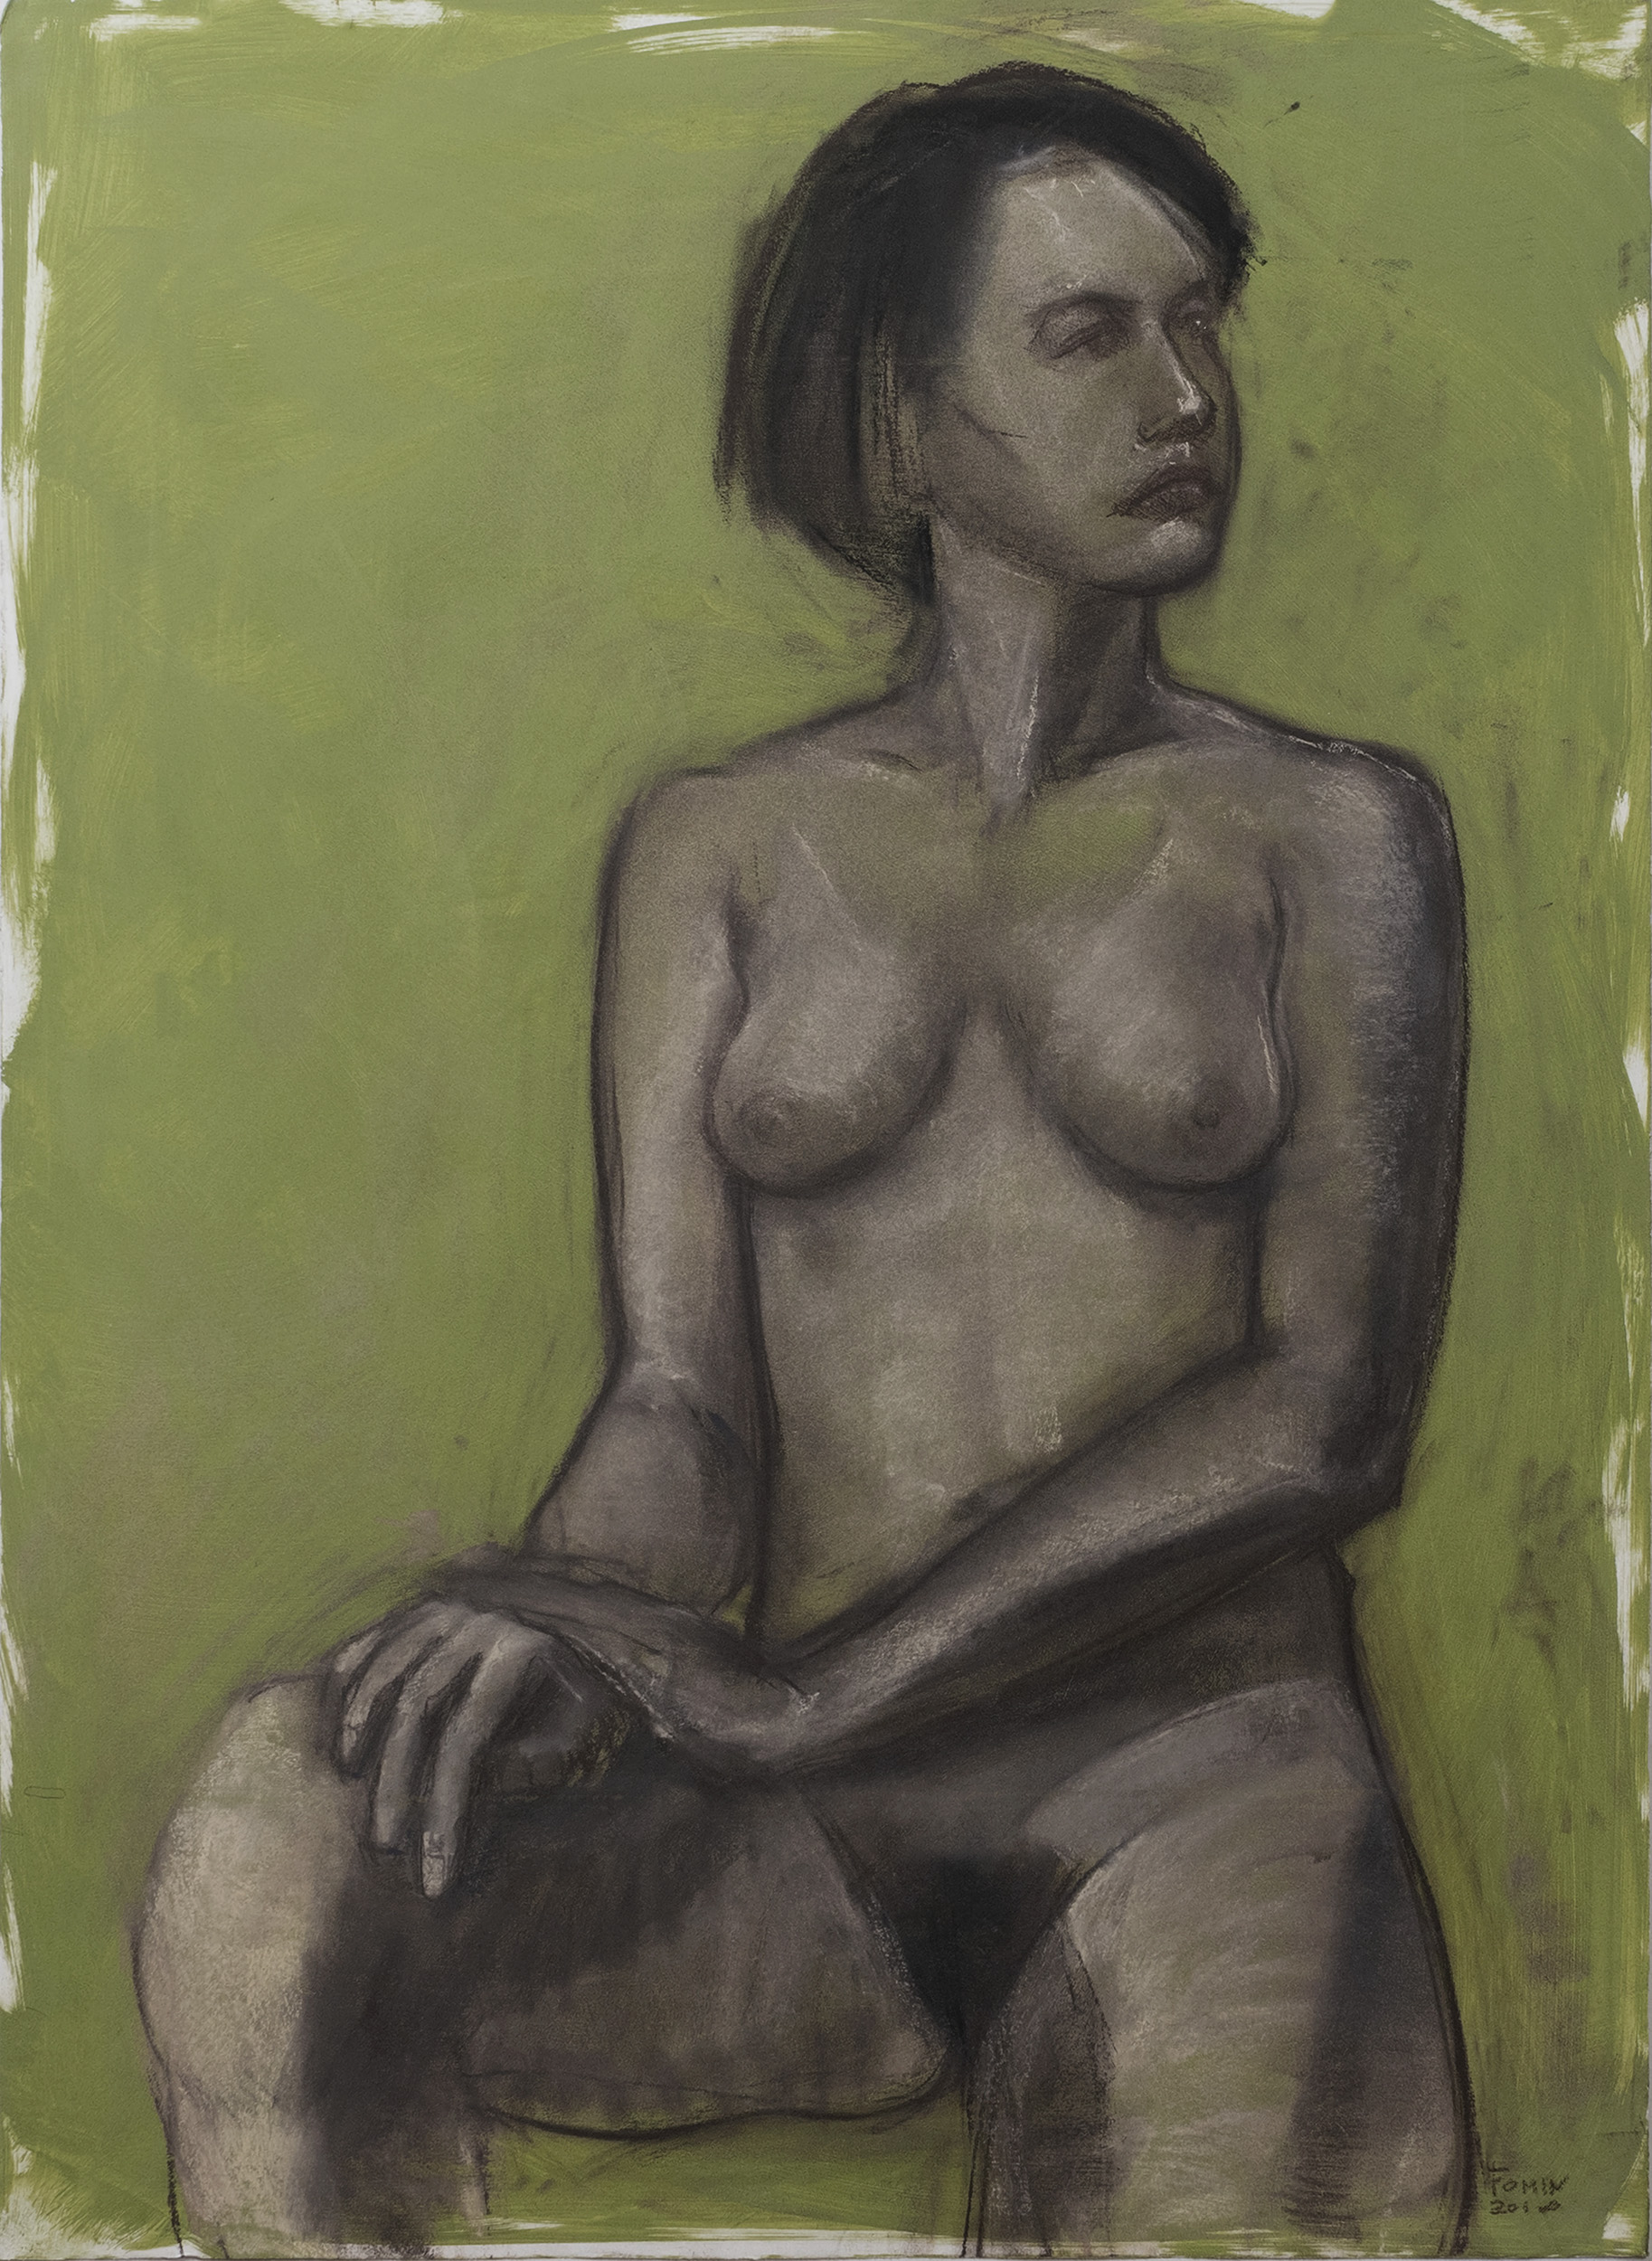 The Girl on the Green - 1, Konstantin Fomin, Buy the painting Pastel